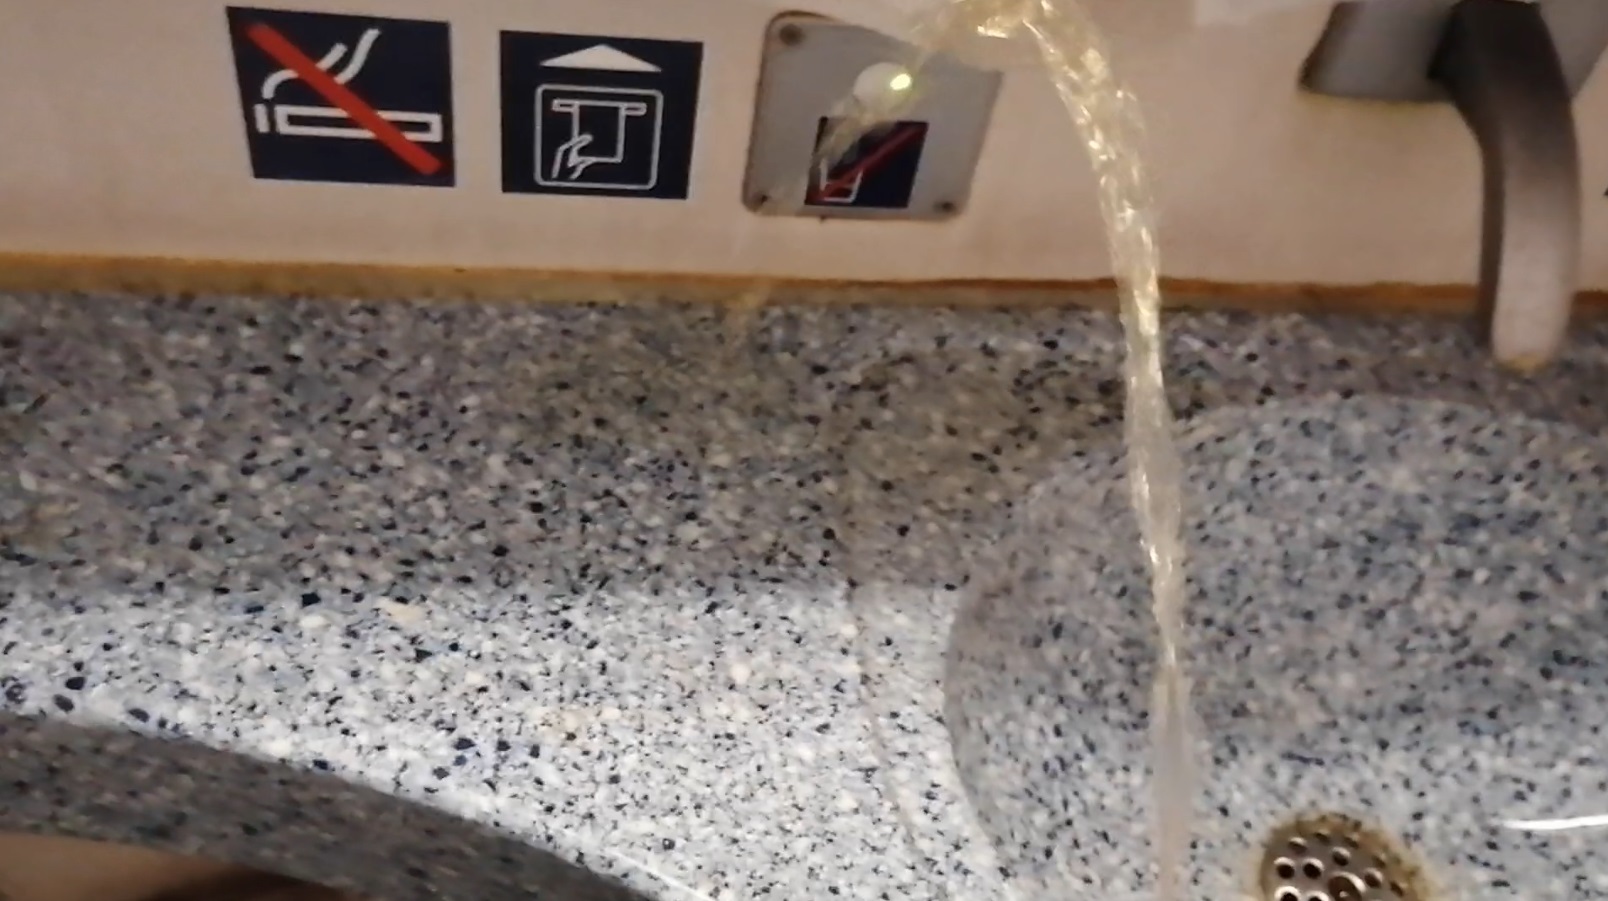 Marking sink area of smelly train toilet